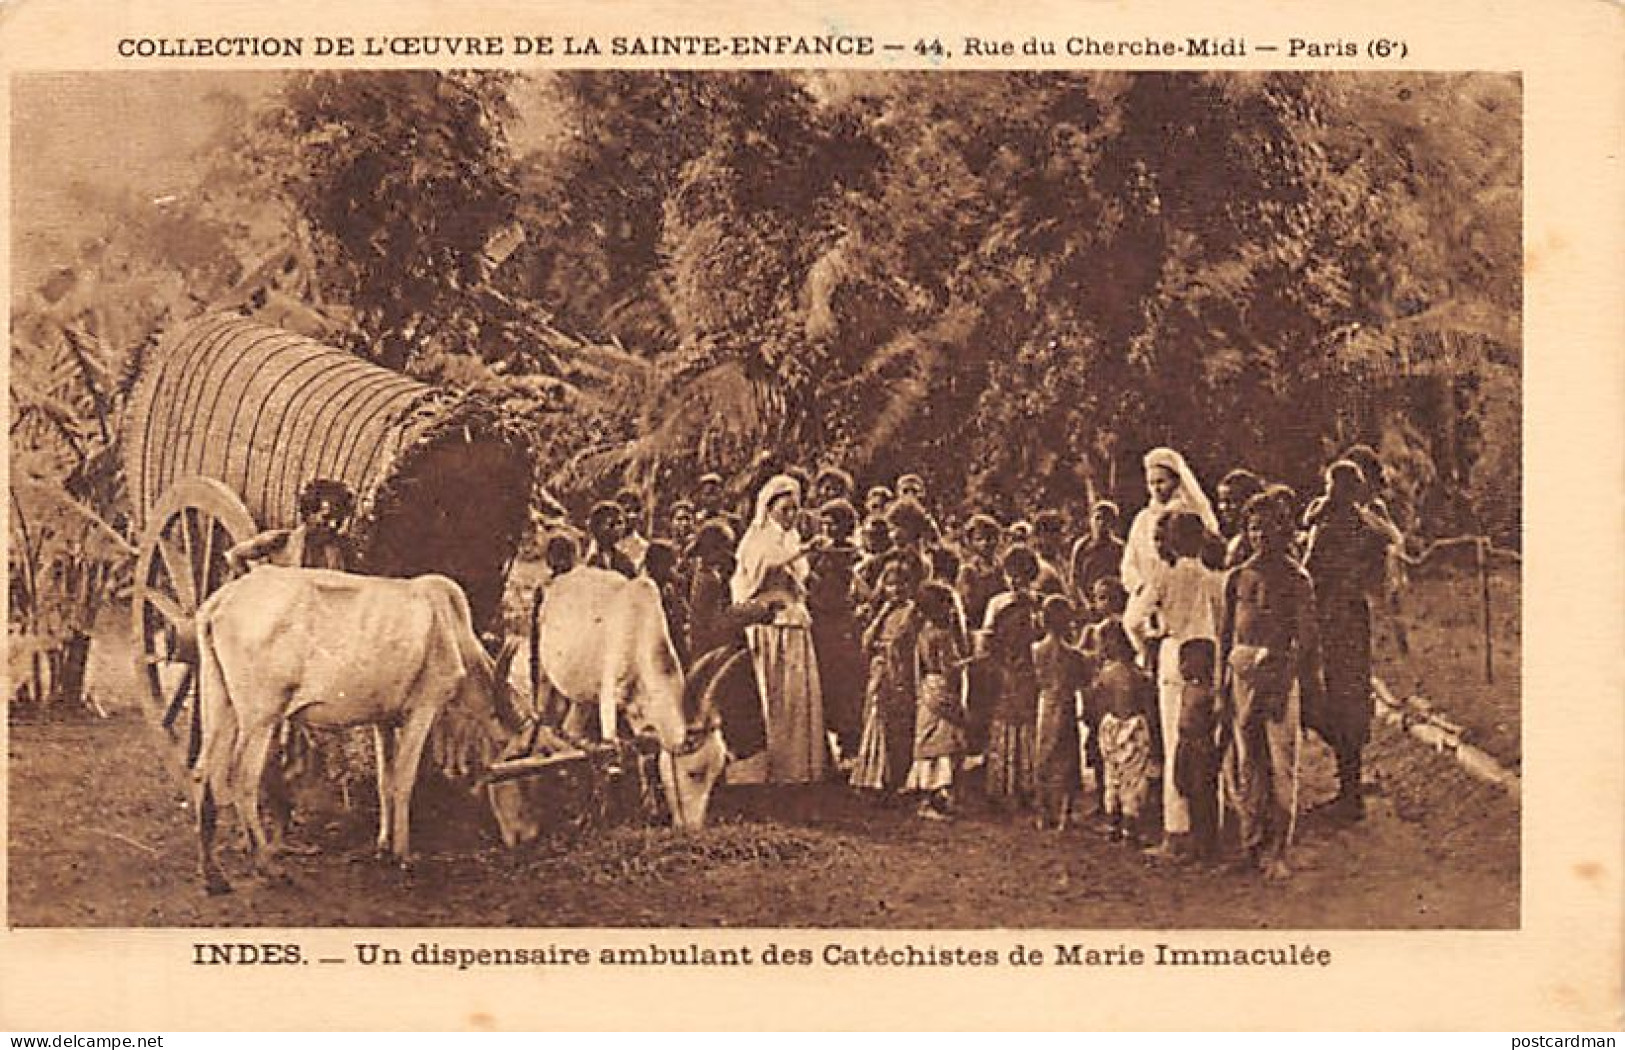 India - A Dispensary Of The Catechists Of Mary Immaculate - Publ. Oeuvre De La Sainte-Enfance  - India